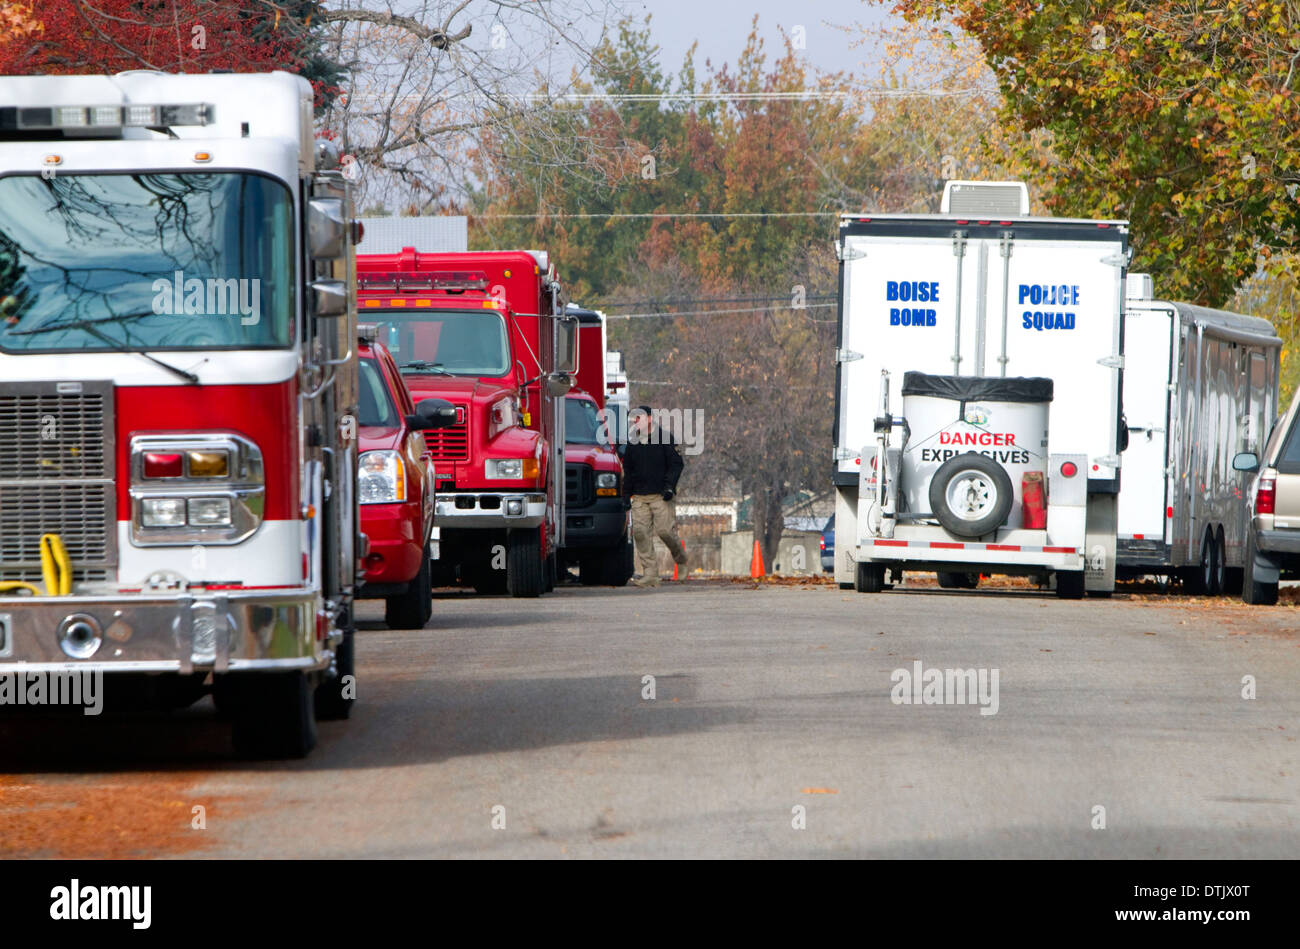 Fire engines and bomb units at the scene of an explosive materials incident in Boise, Idaho, USA. Stock Photo